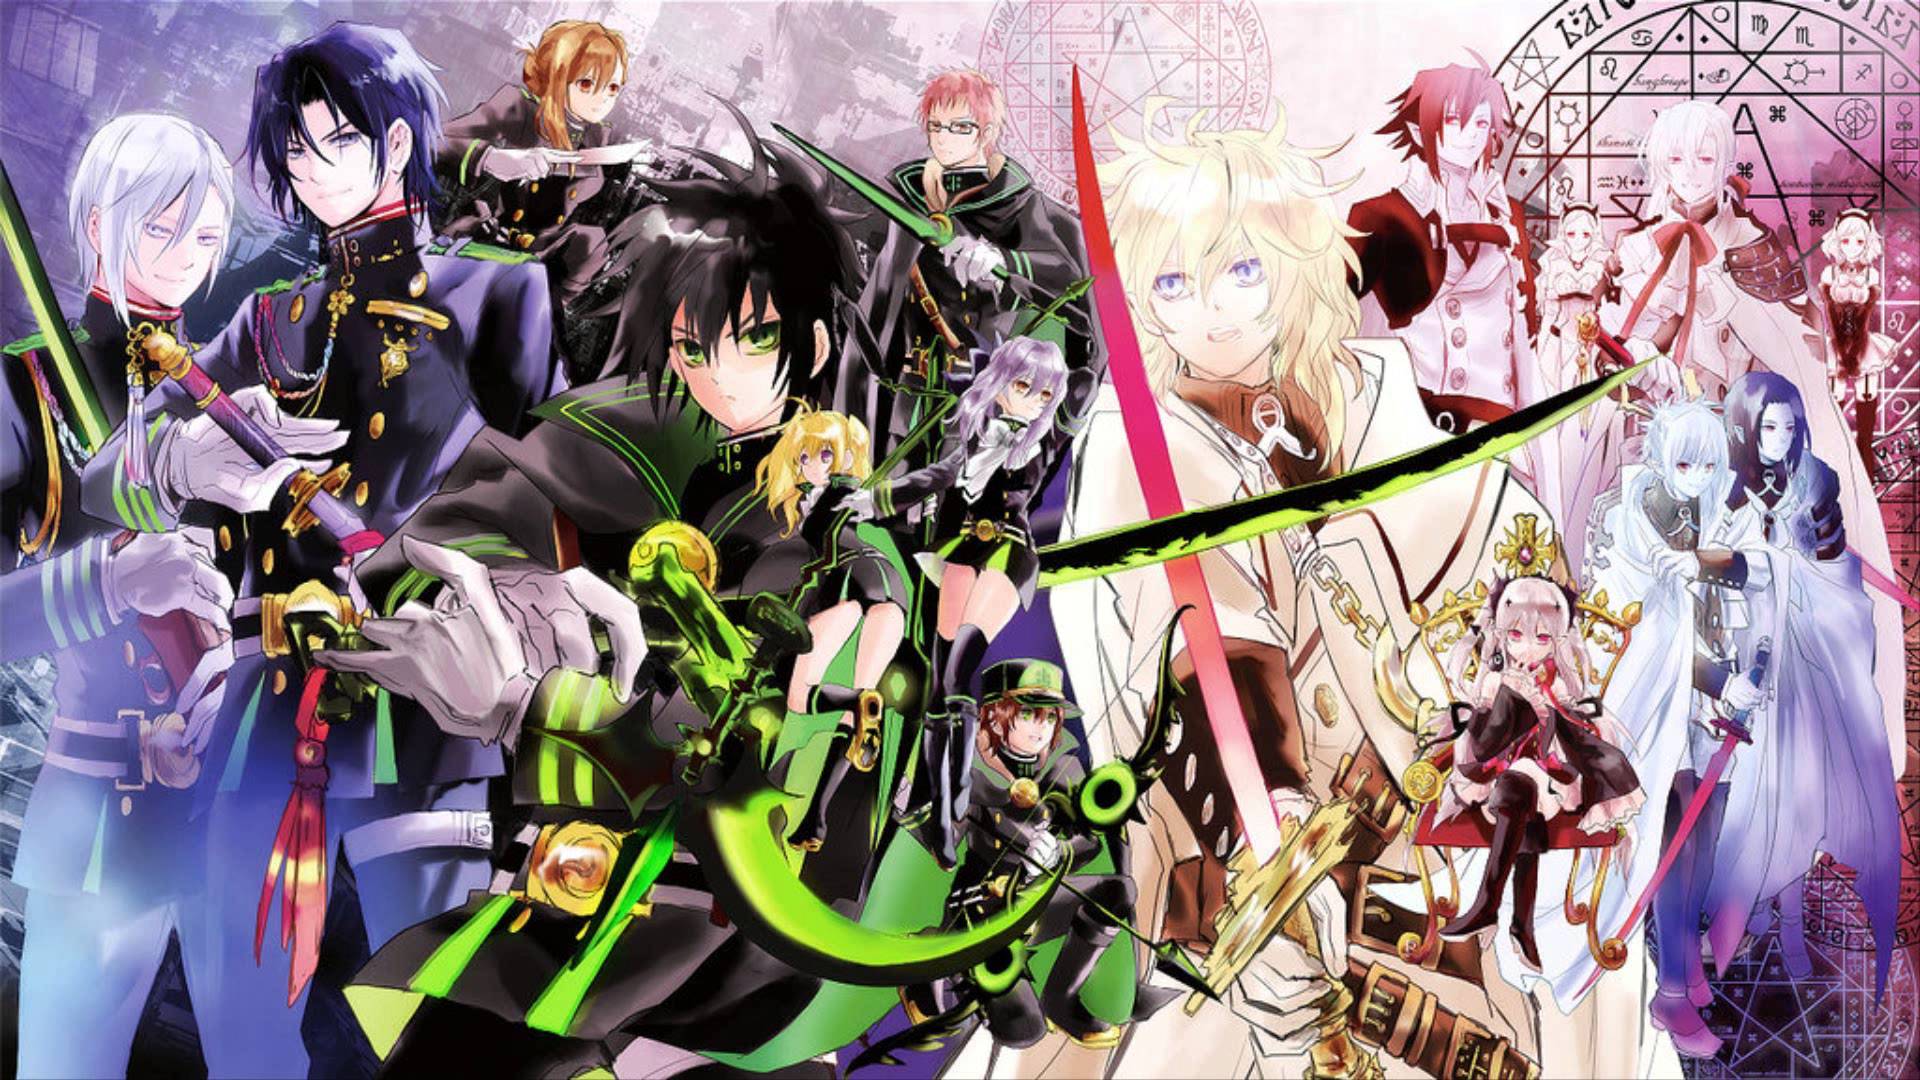 Seraph Of The End Wallpapers Wallpaper Cave